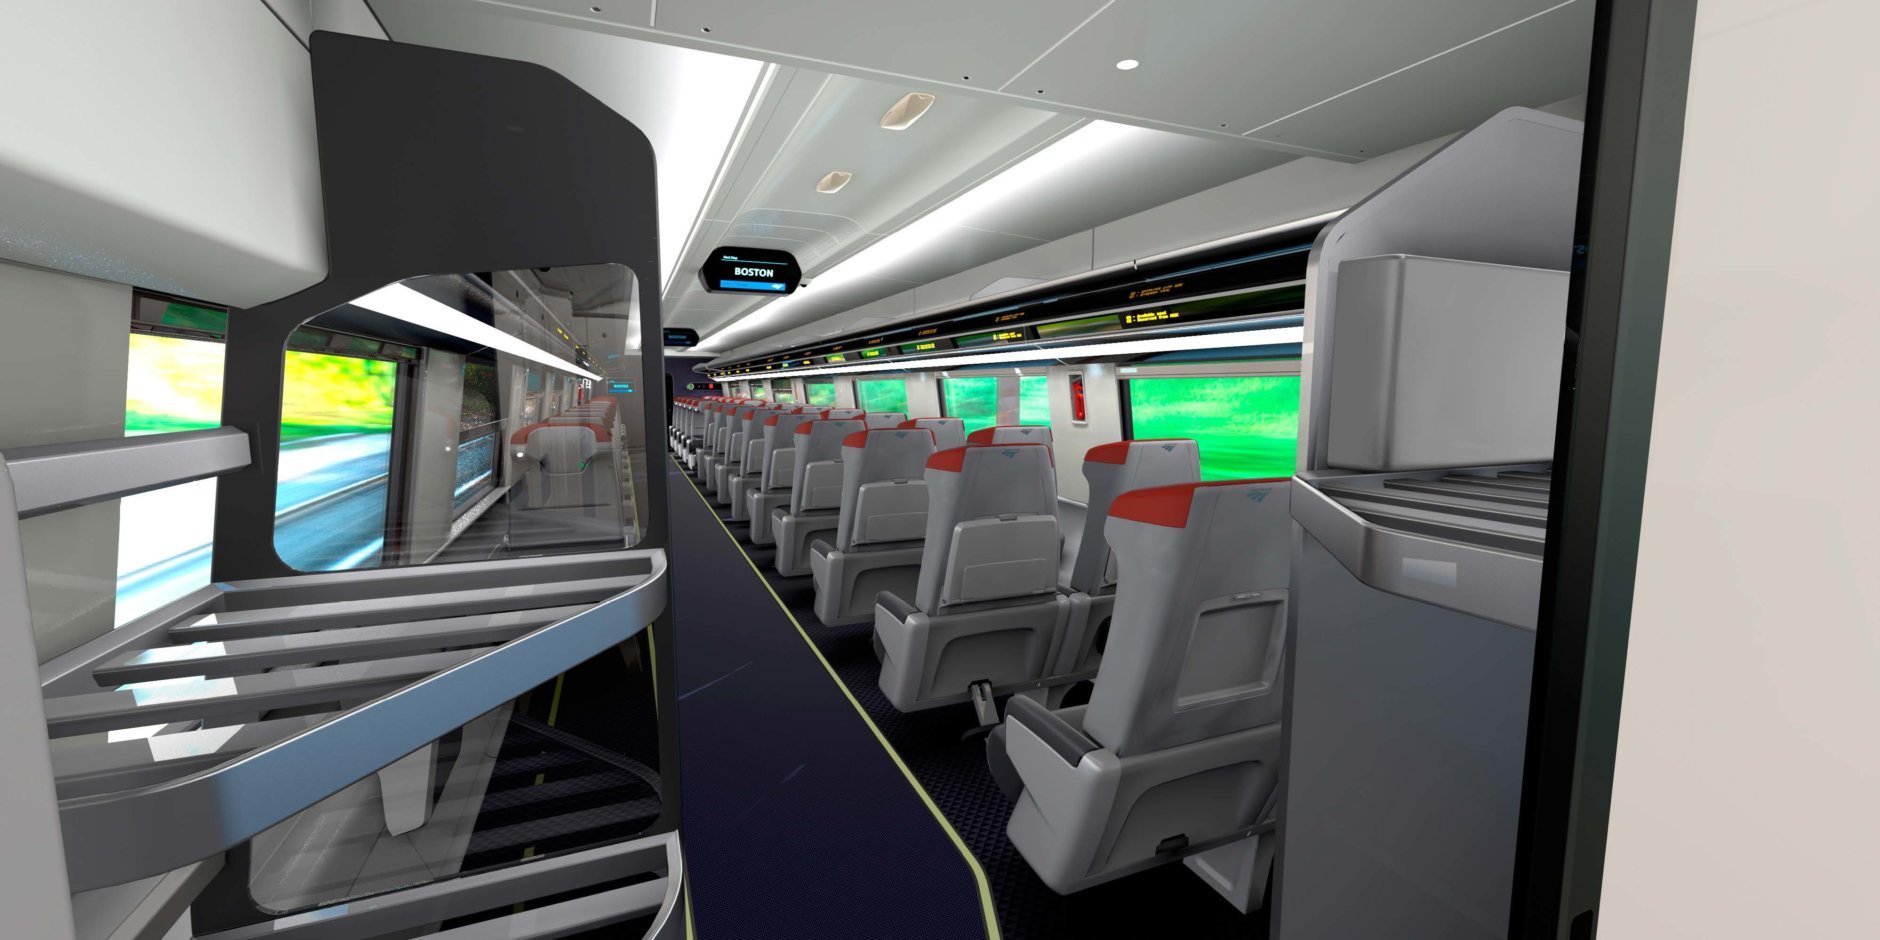 A streamlined overhead luggage storage will be offered in the new Acela trainsets. (Courtesy Amtrak)